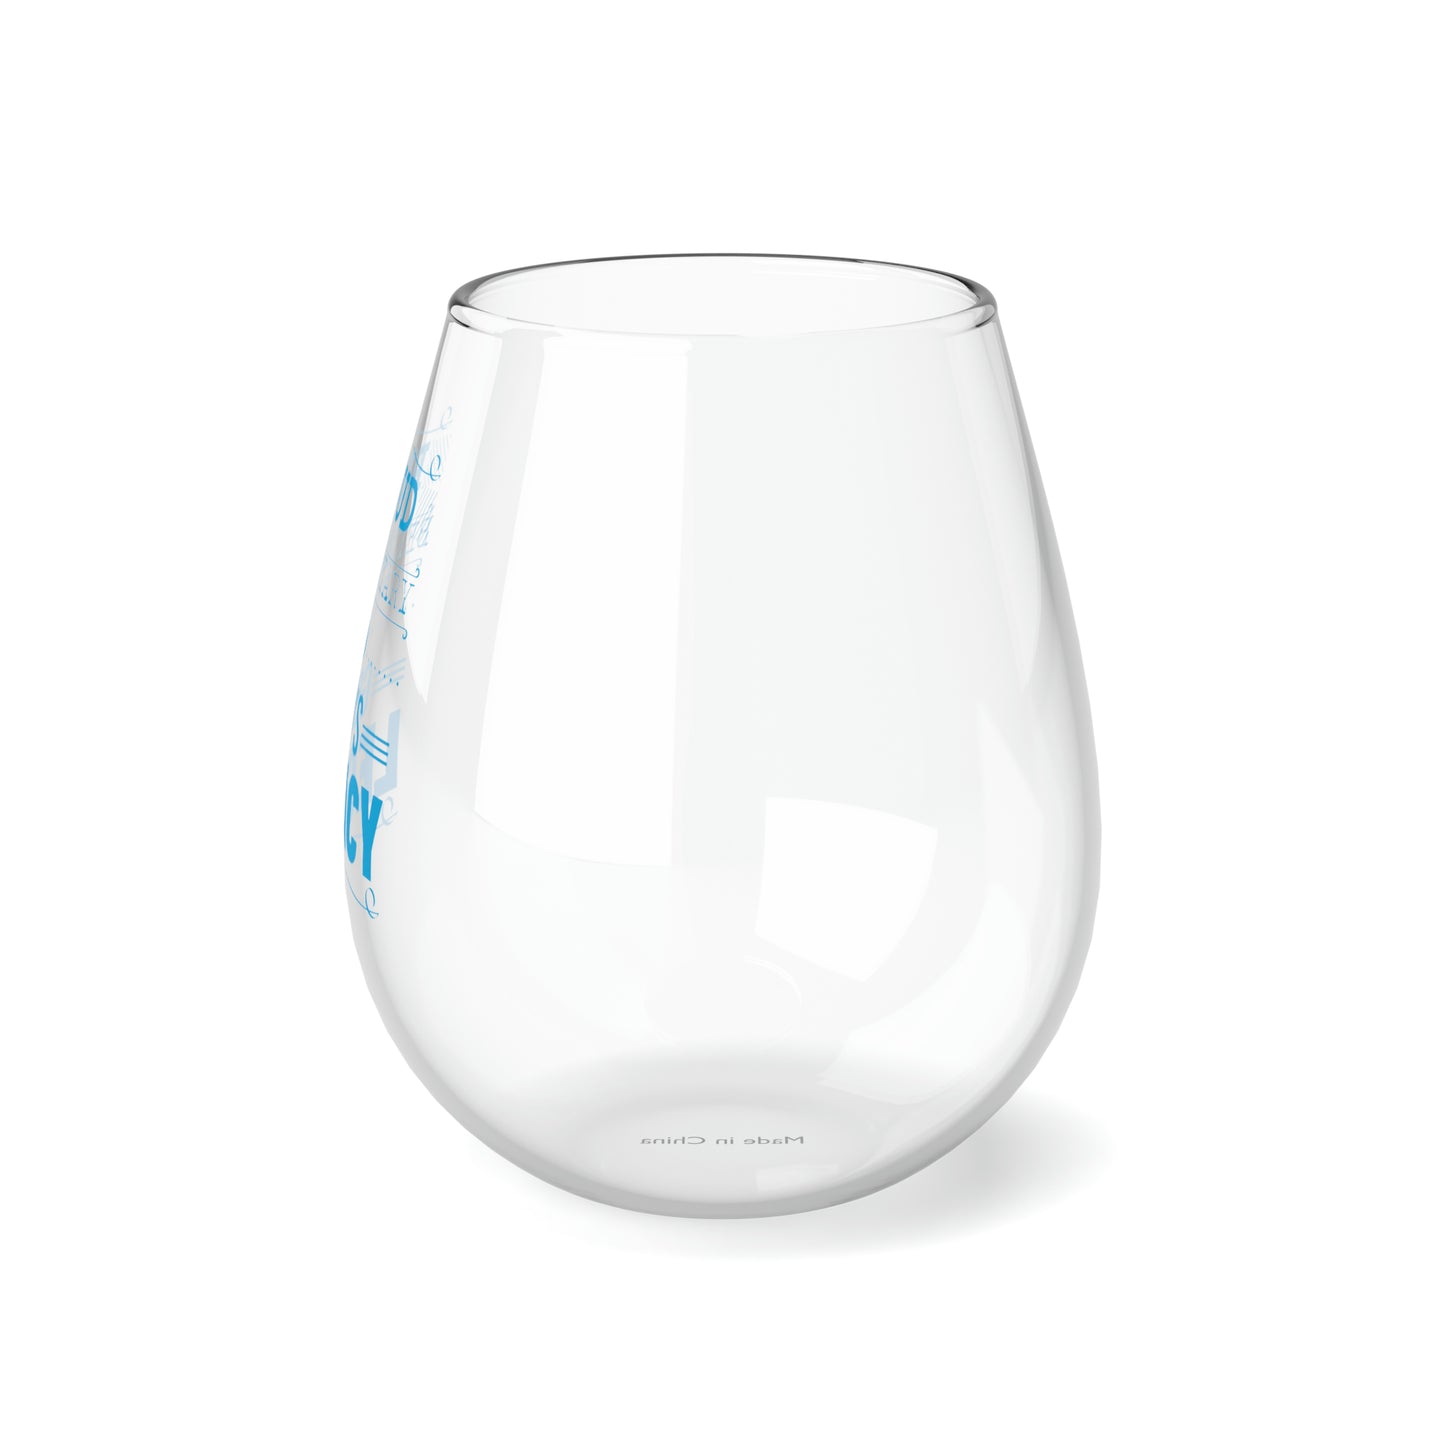 Proud Beneficiary of God's Legacy Stemless Wine Glass, 11.75oz